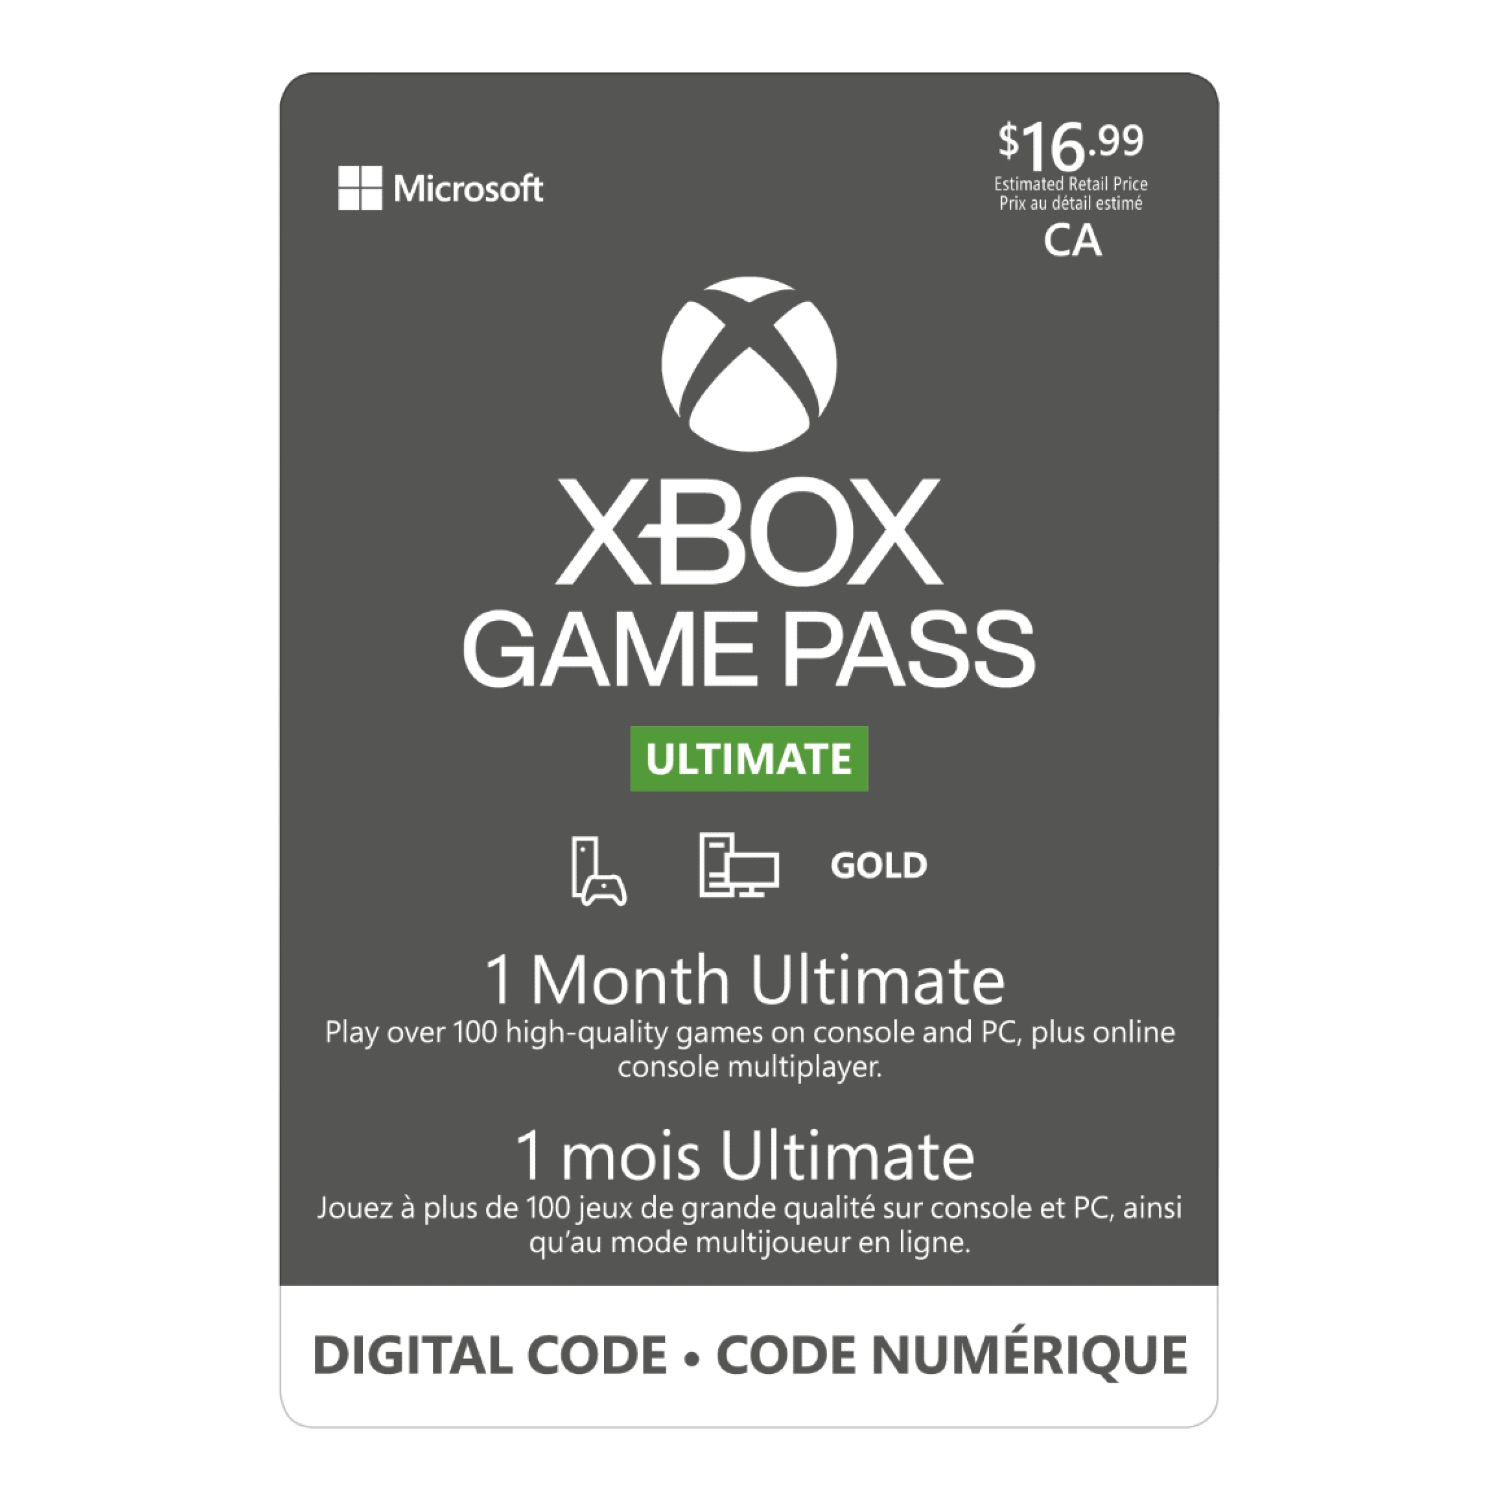 Xbox Game Pass Ultimate codes are $20 off at multiple retailers